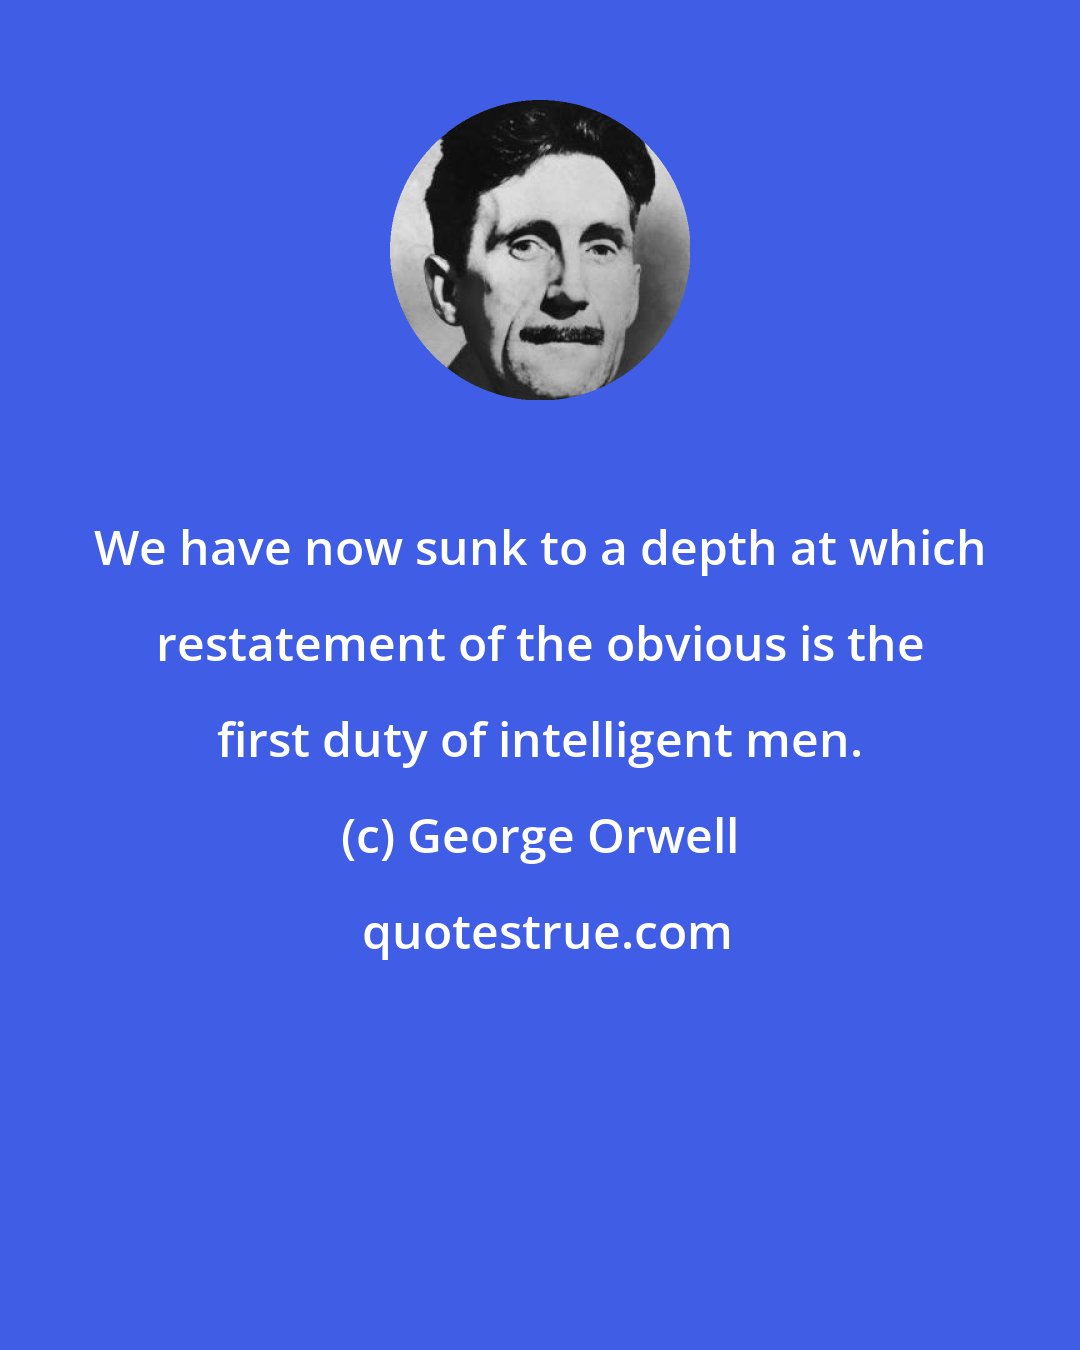 George Orwell: We have now sunk to a depth at which restatement of the obvious is the first duty of intelligent men.